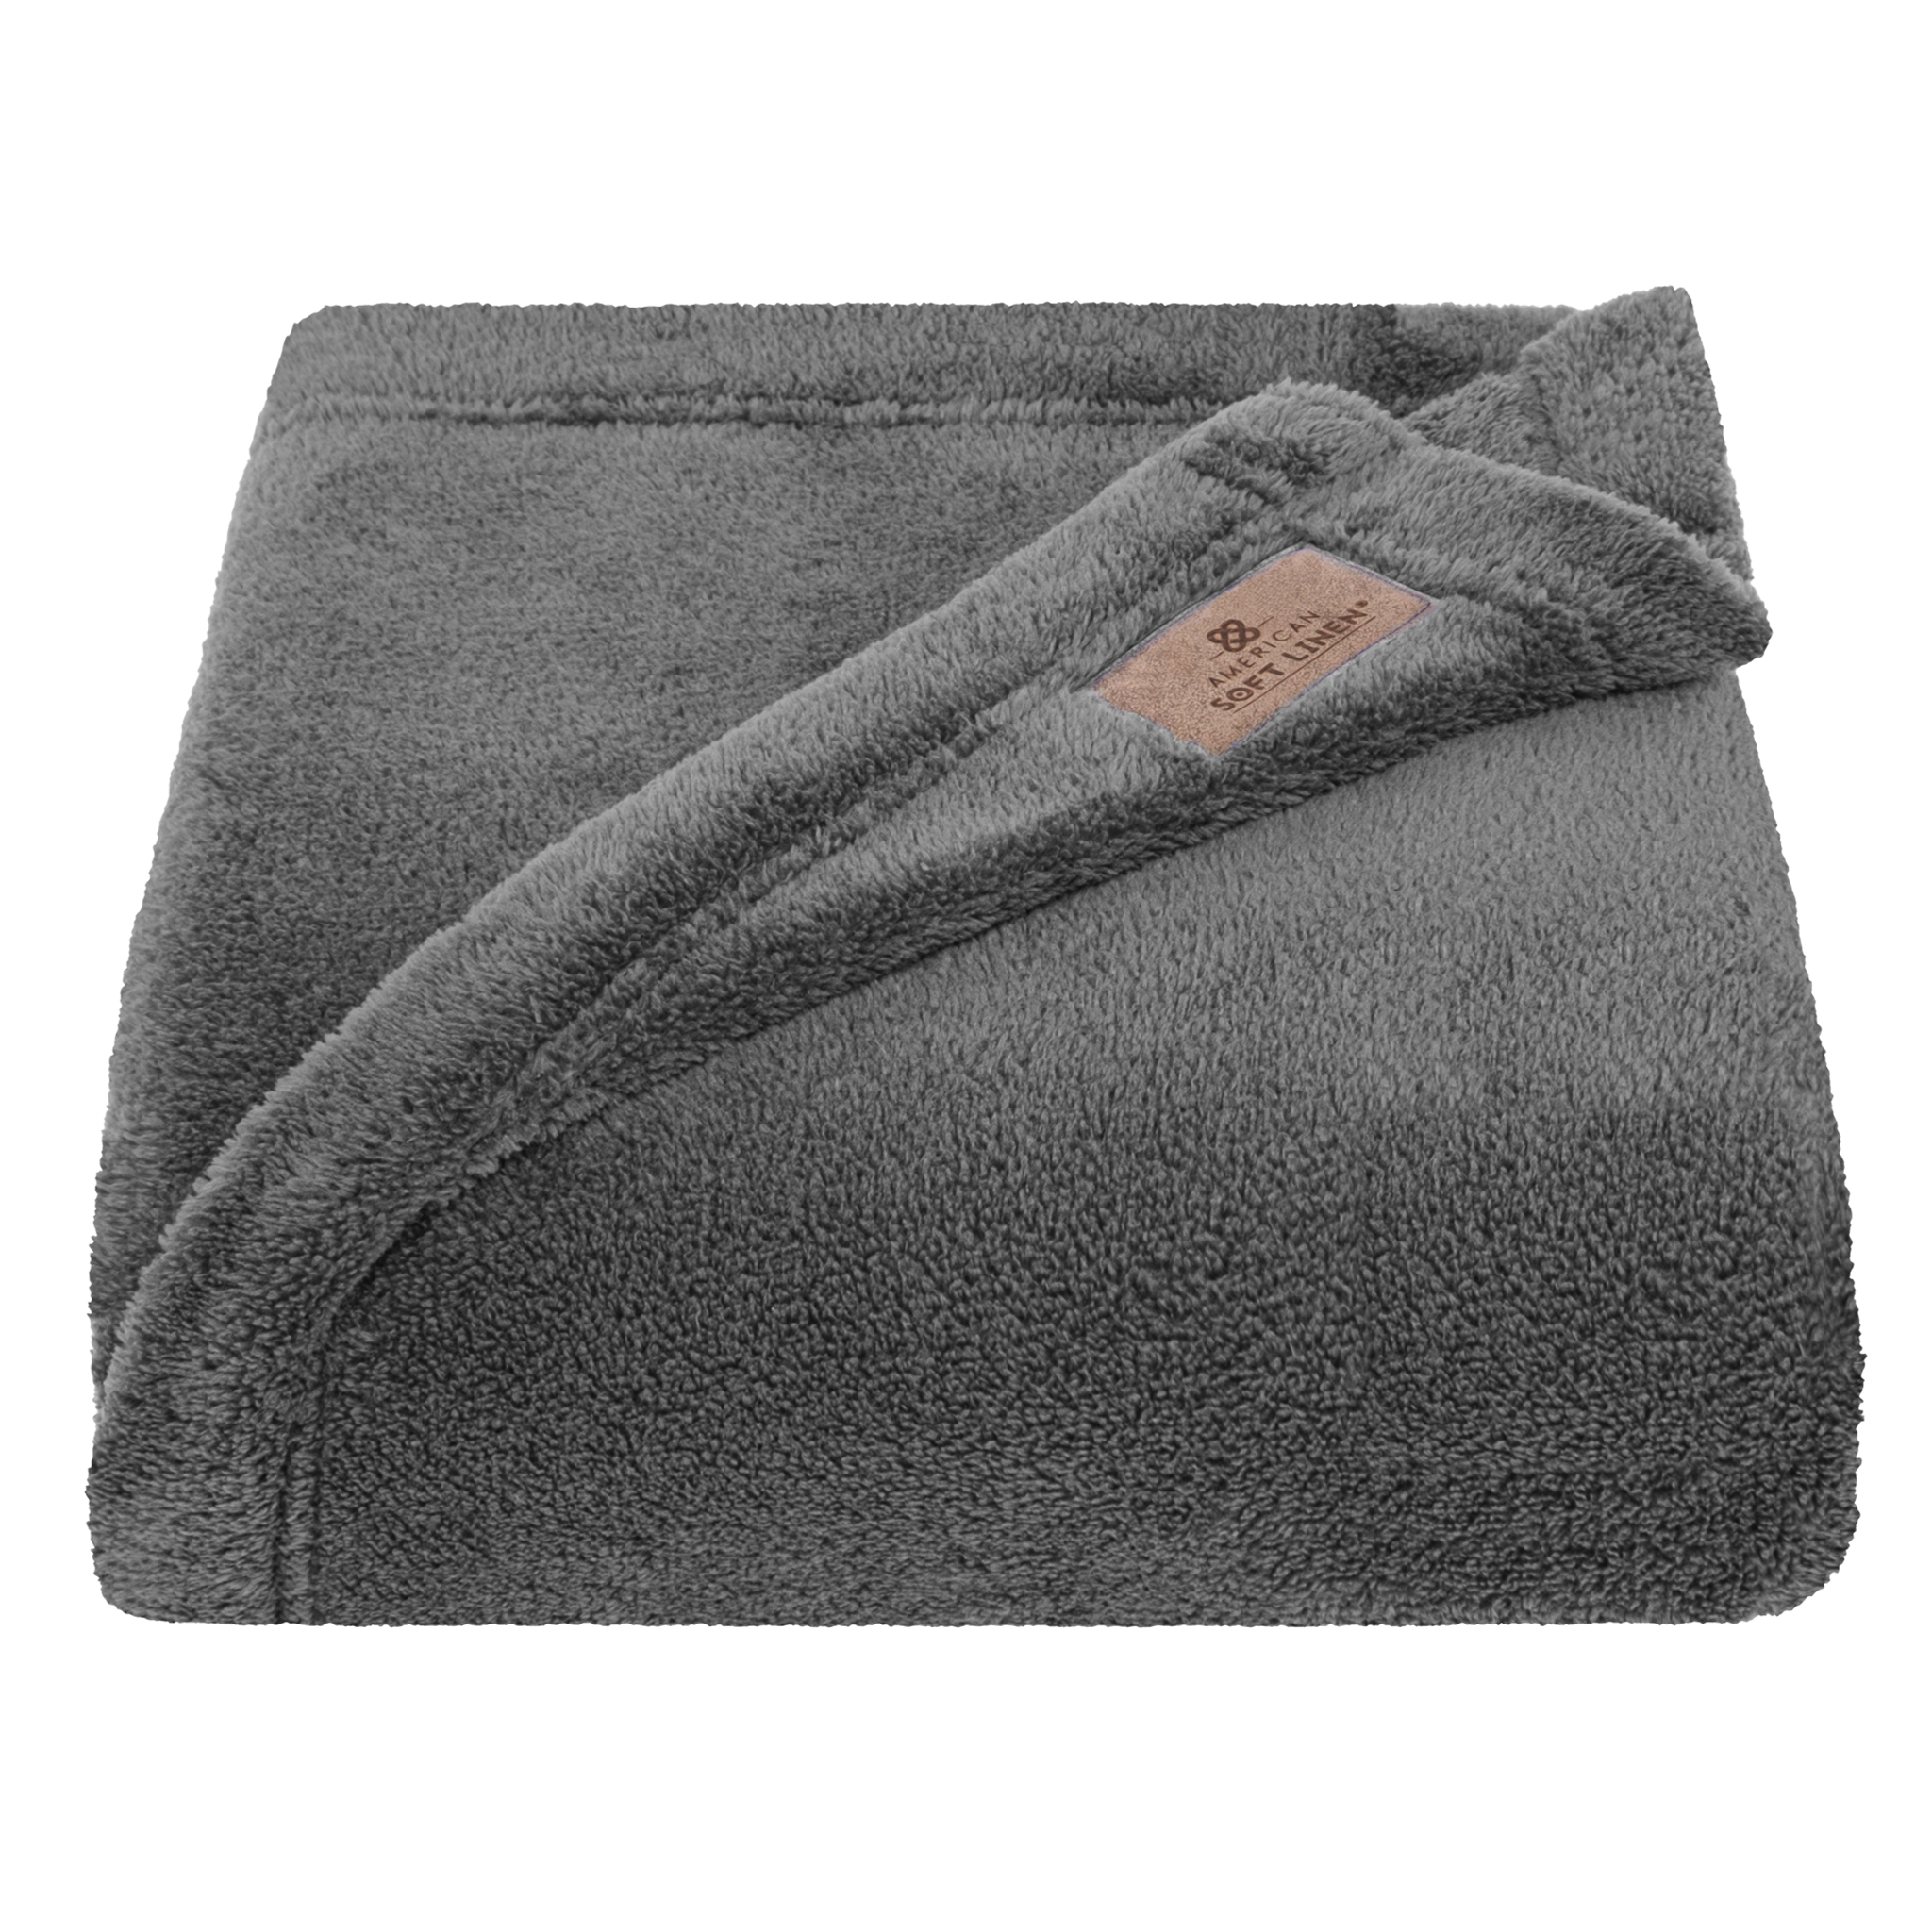 American Soft Linen - Bedding Fleece Blanket - Wholesale - 24 Set Case Pack - Throw Size 50x60 inches - Gray - 3